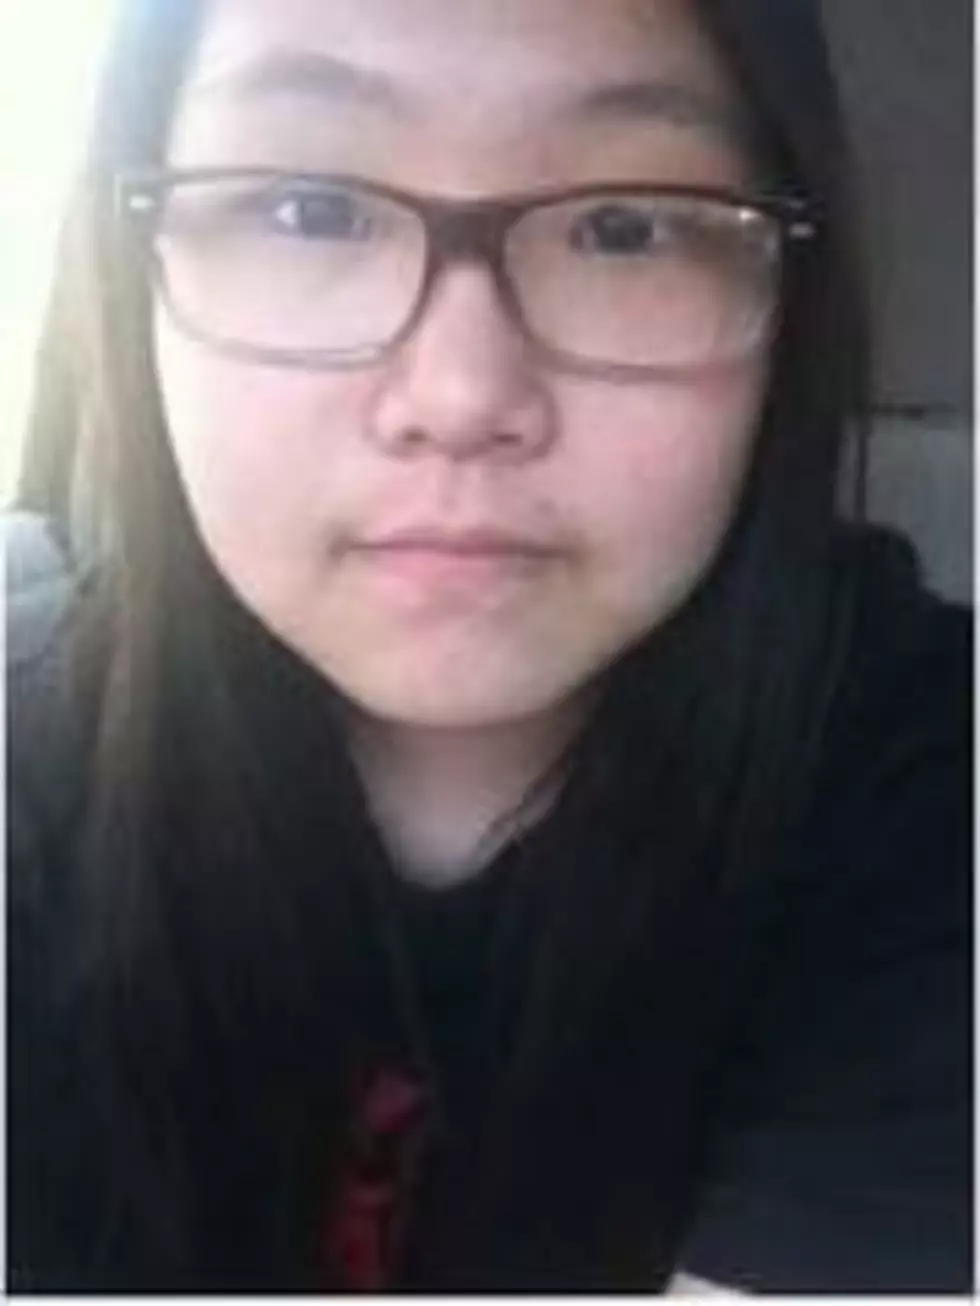 Statewide alert issued for missing North Jersey teen